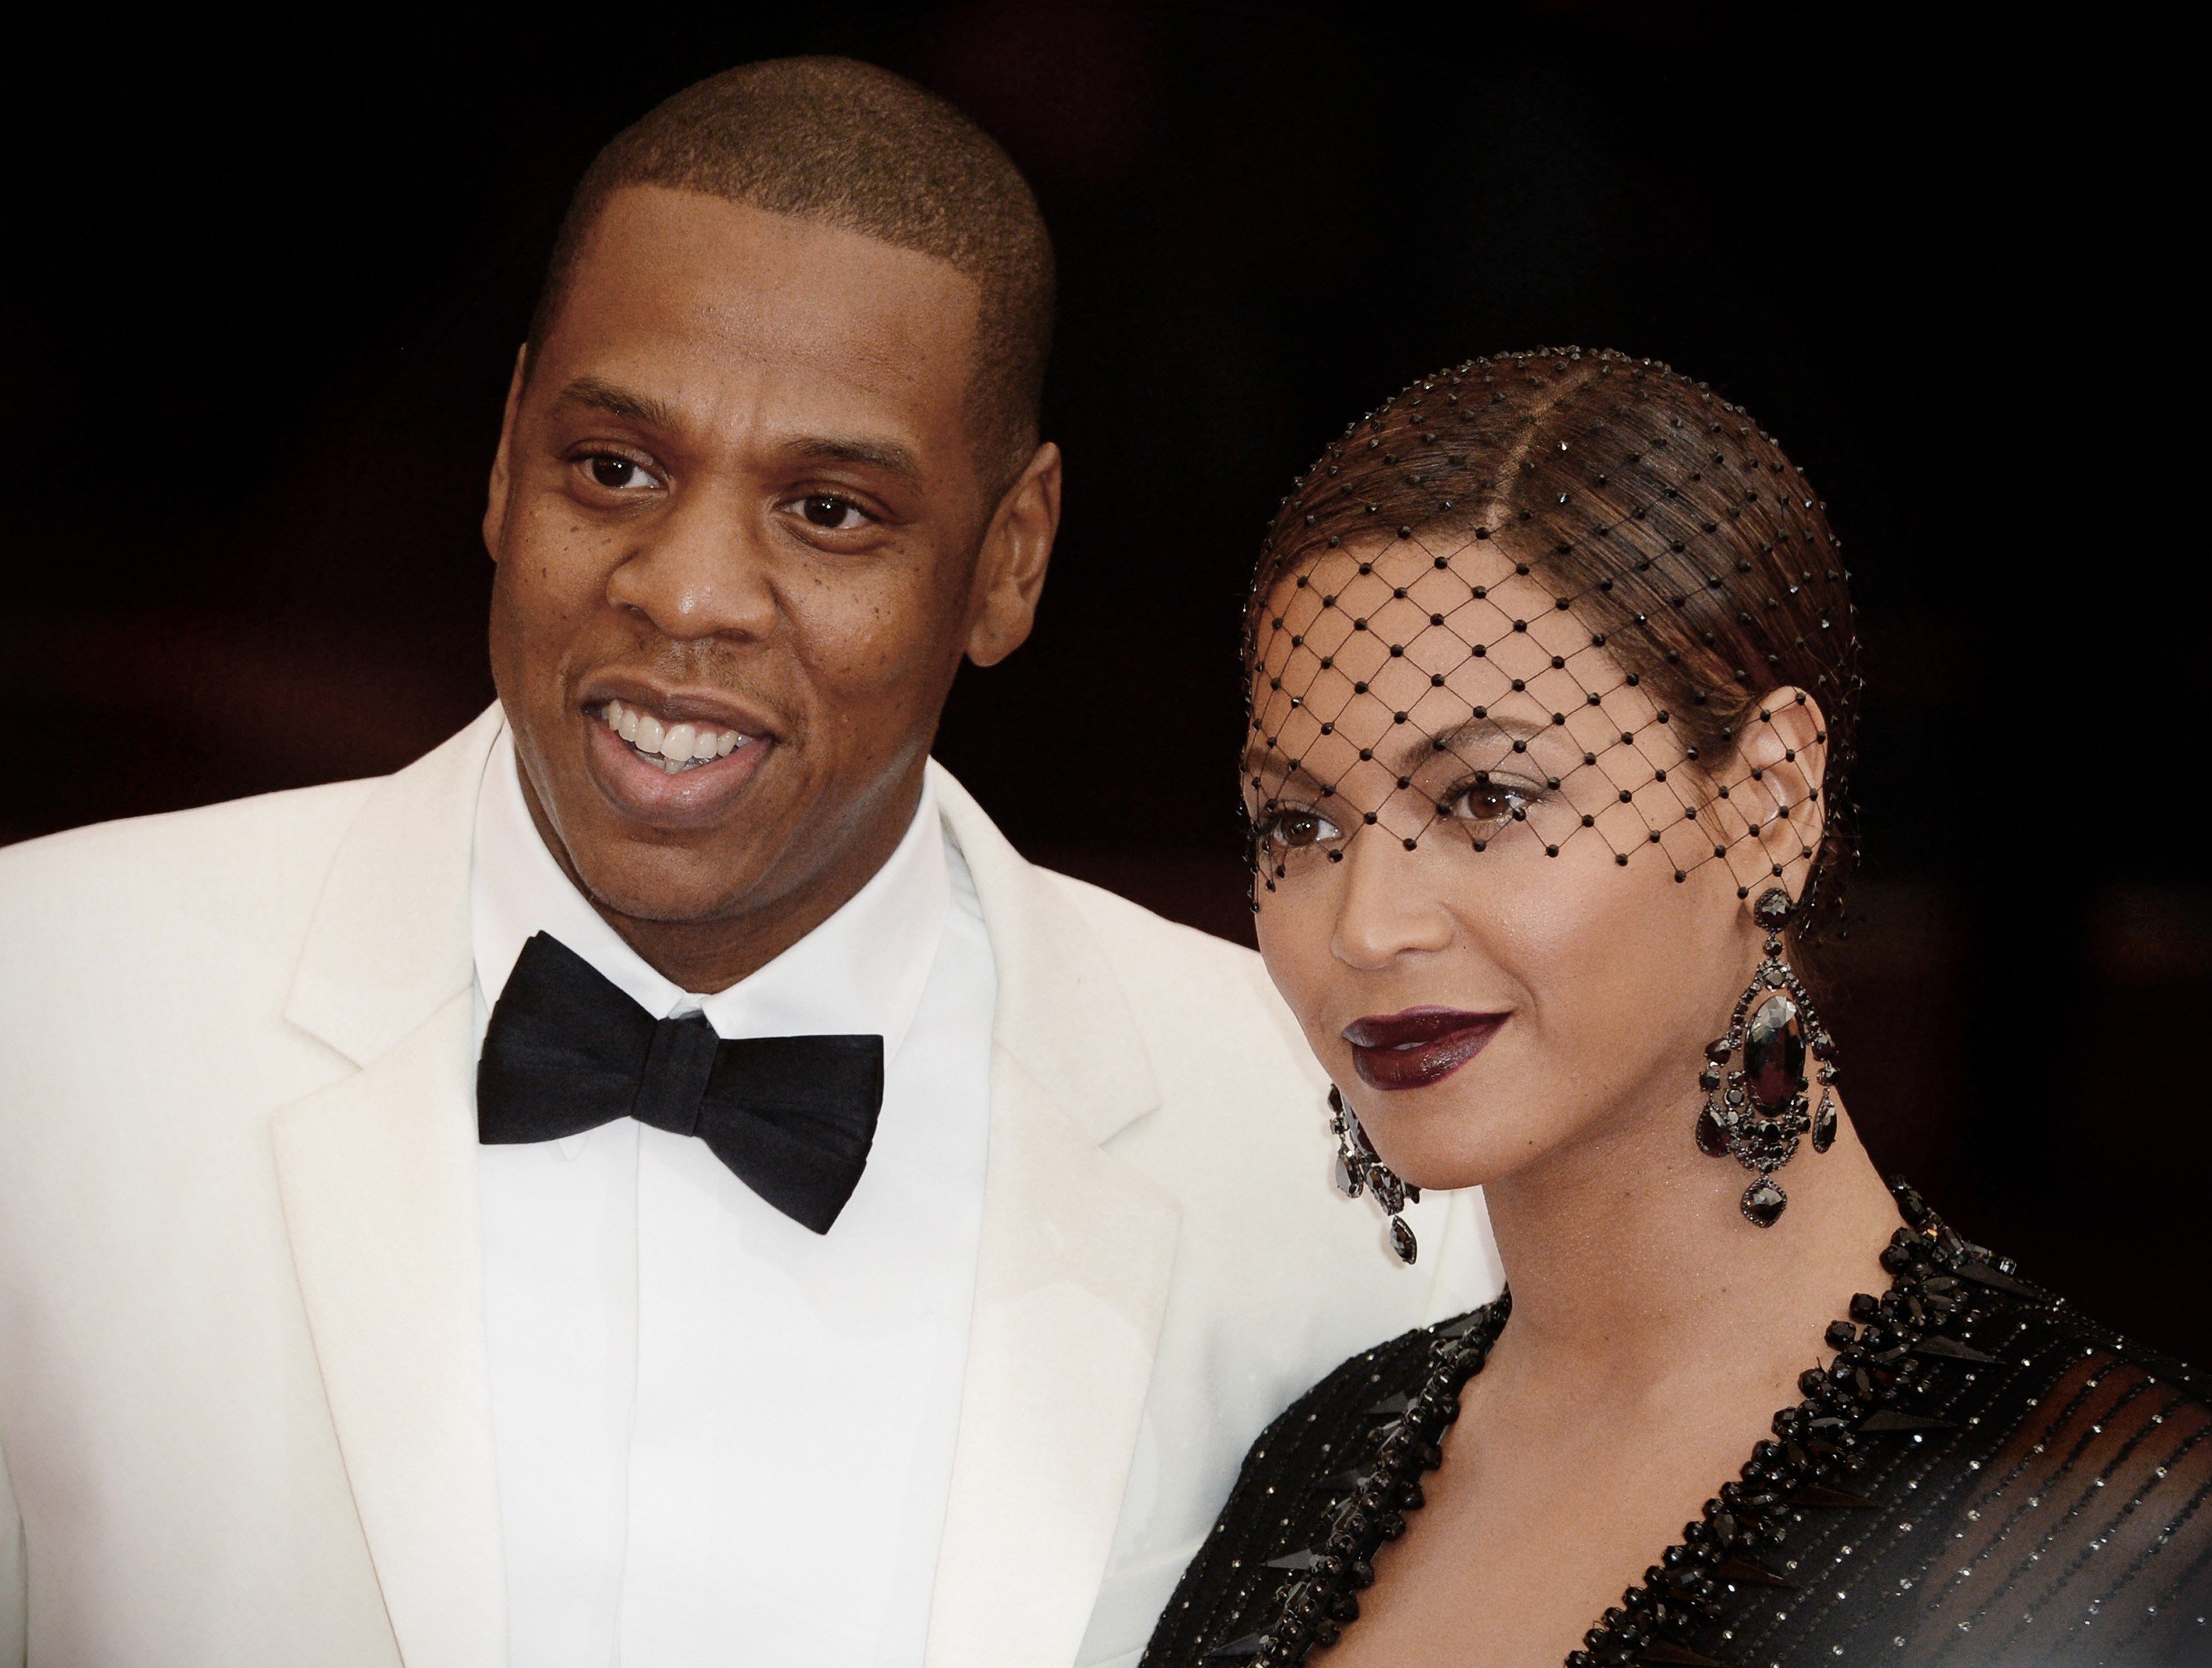 Jay-Z bought Beyoncé her own private island in the Florida Keys for her 29th birthday in 2010. Photo: PA Photos / Abaca Press / TNS